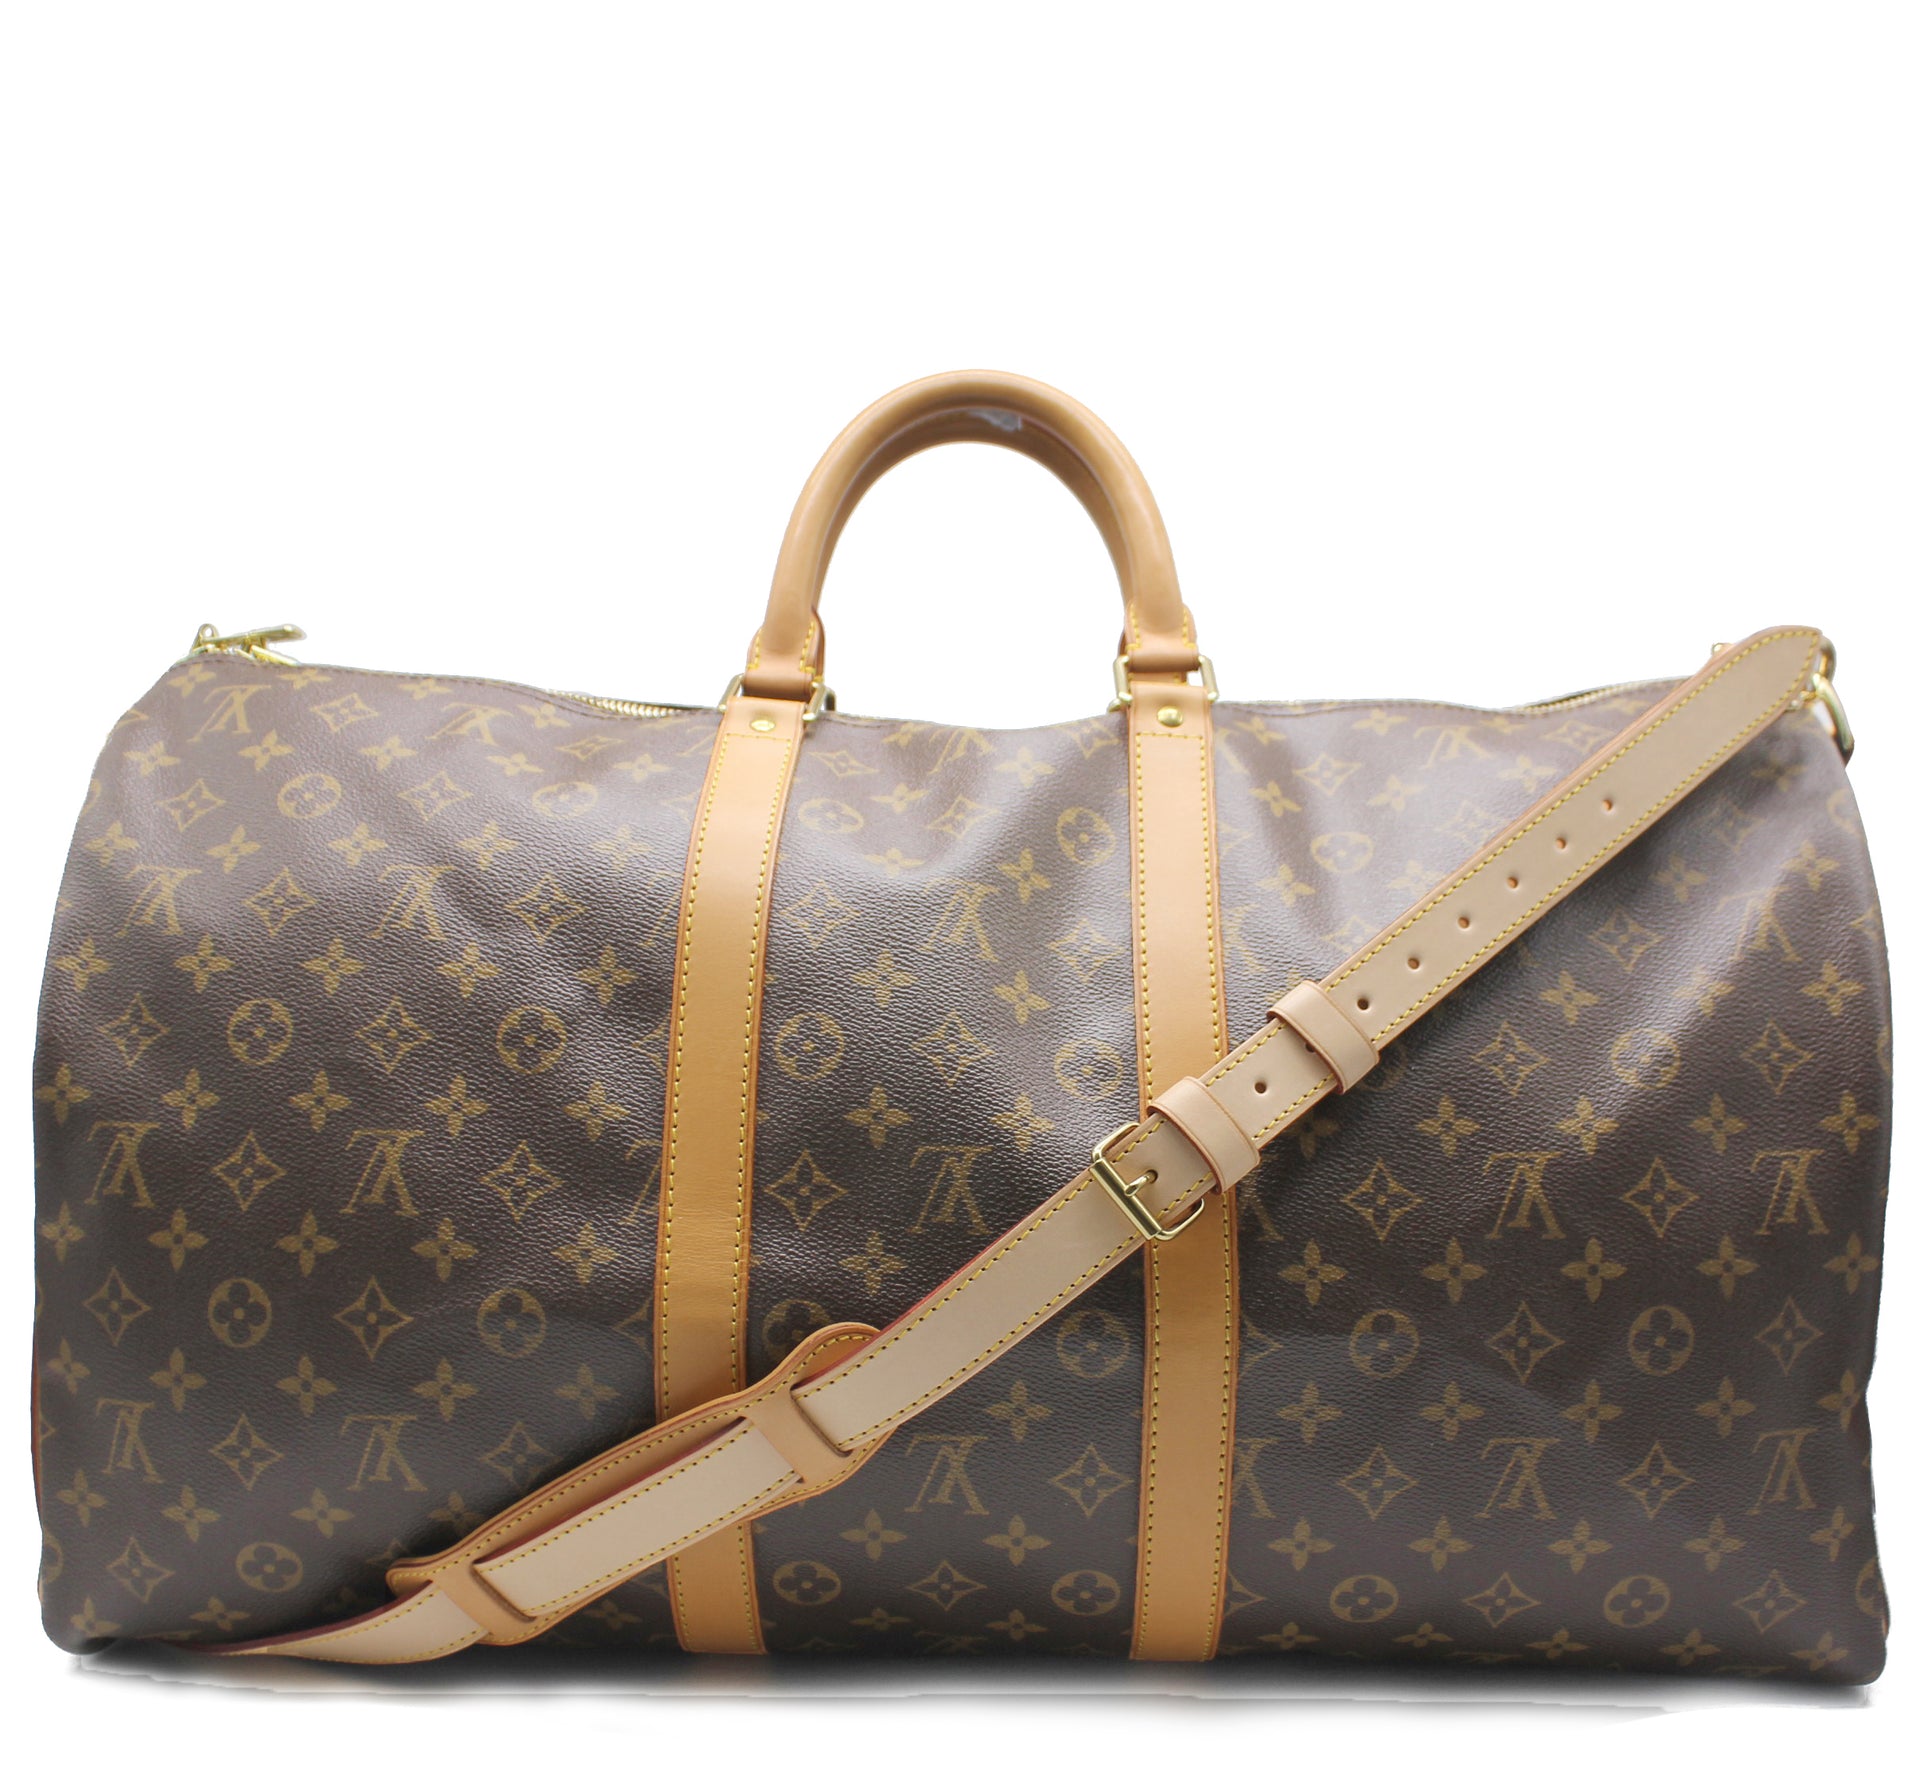 Louis Vuitton by The French Company Monogram Keepall Bag Travel